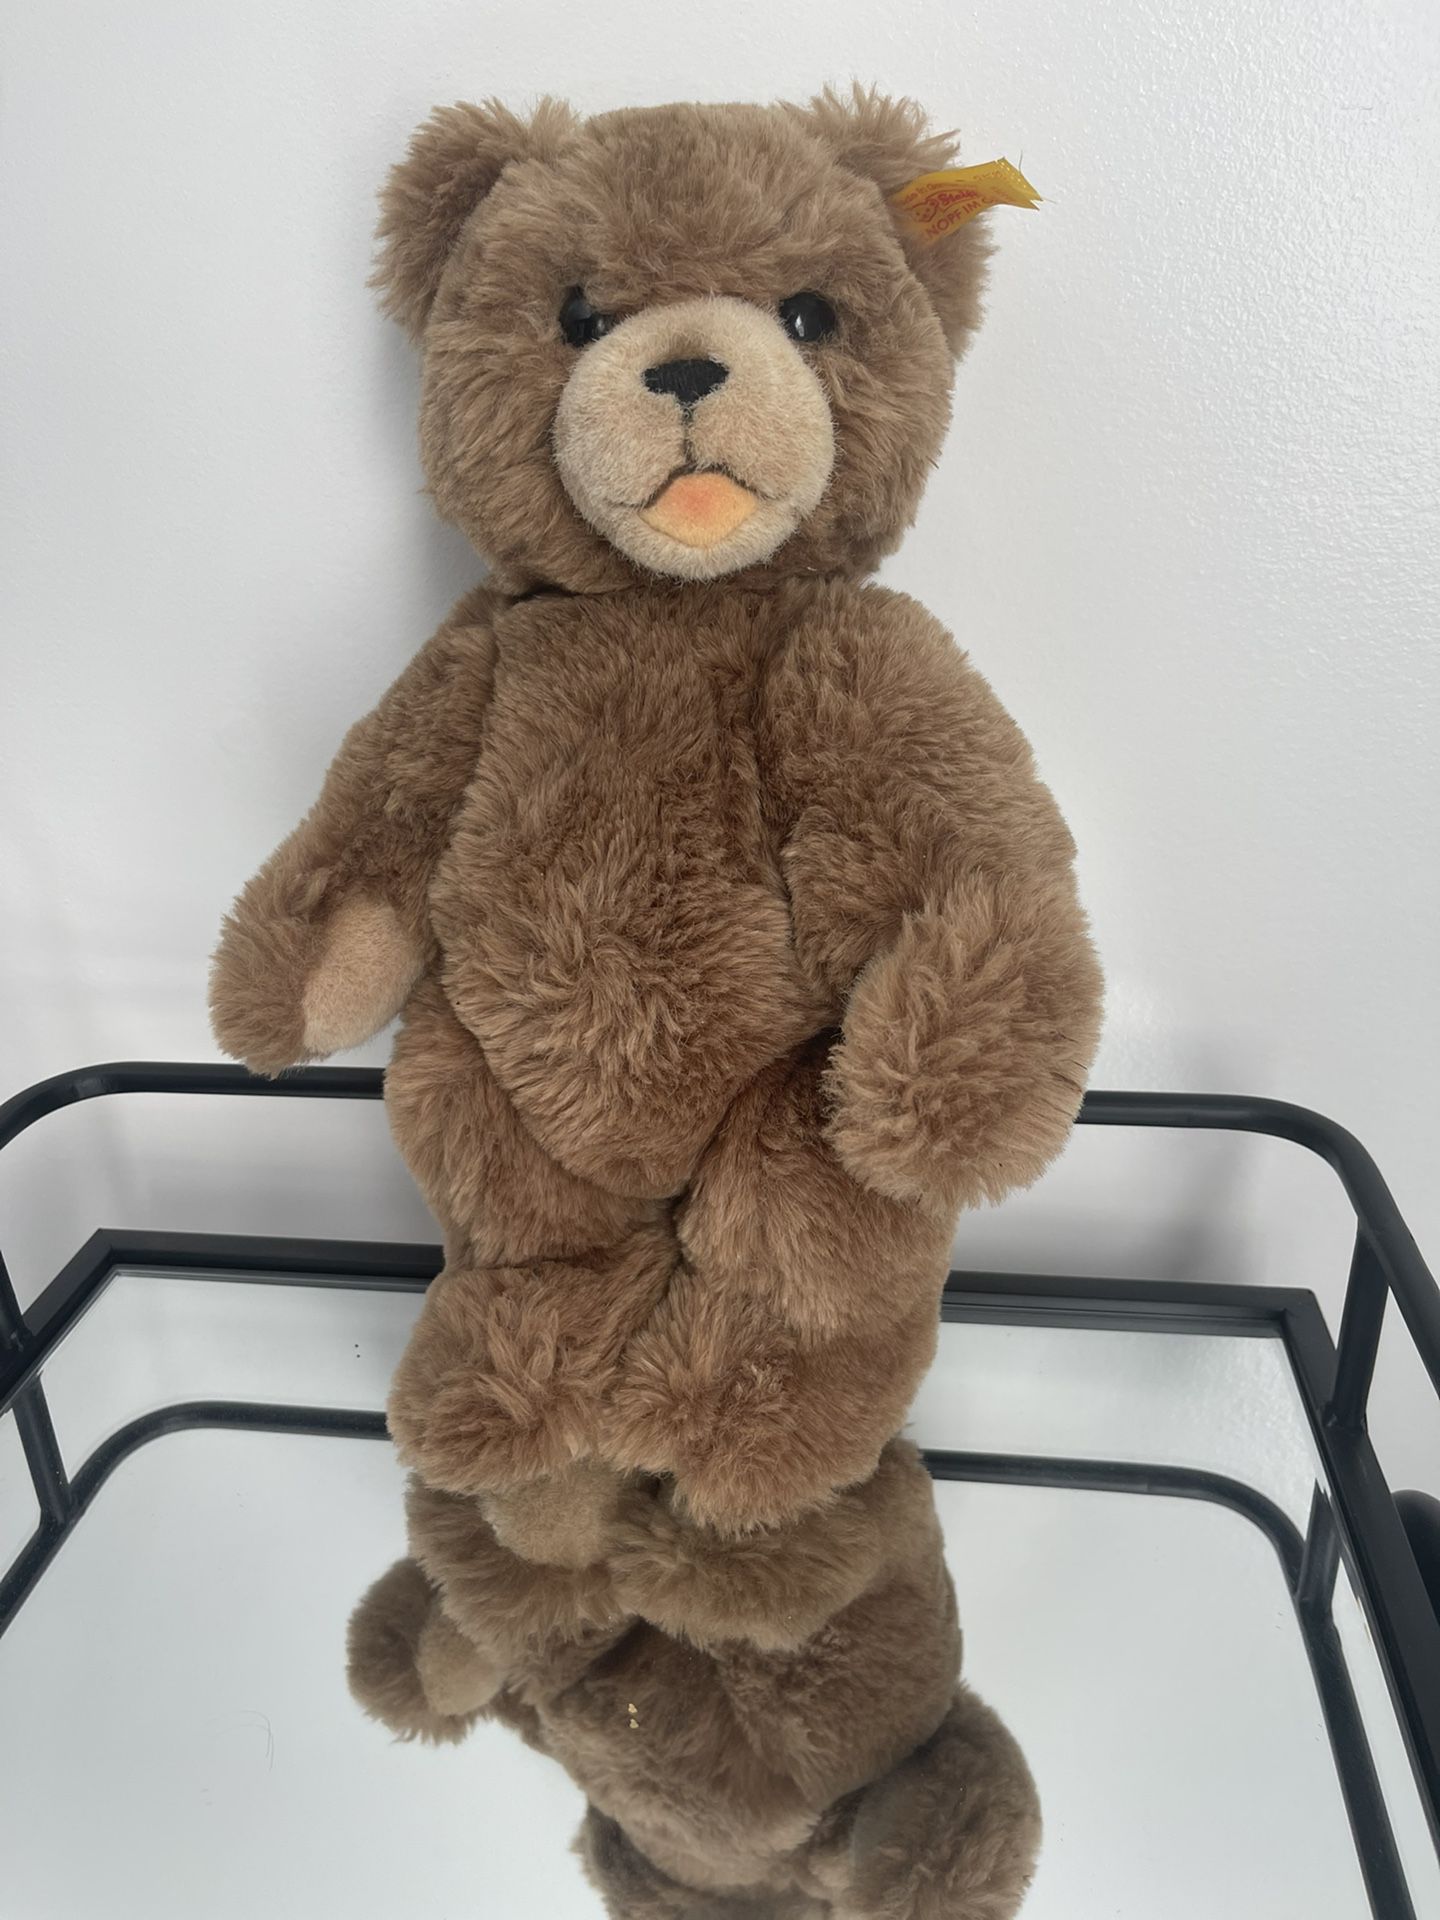 Vintage Steiff Teddy Bear 11 inches 013256 Open Edition Tags Made In Germany Fully Jointed